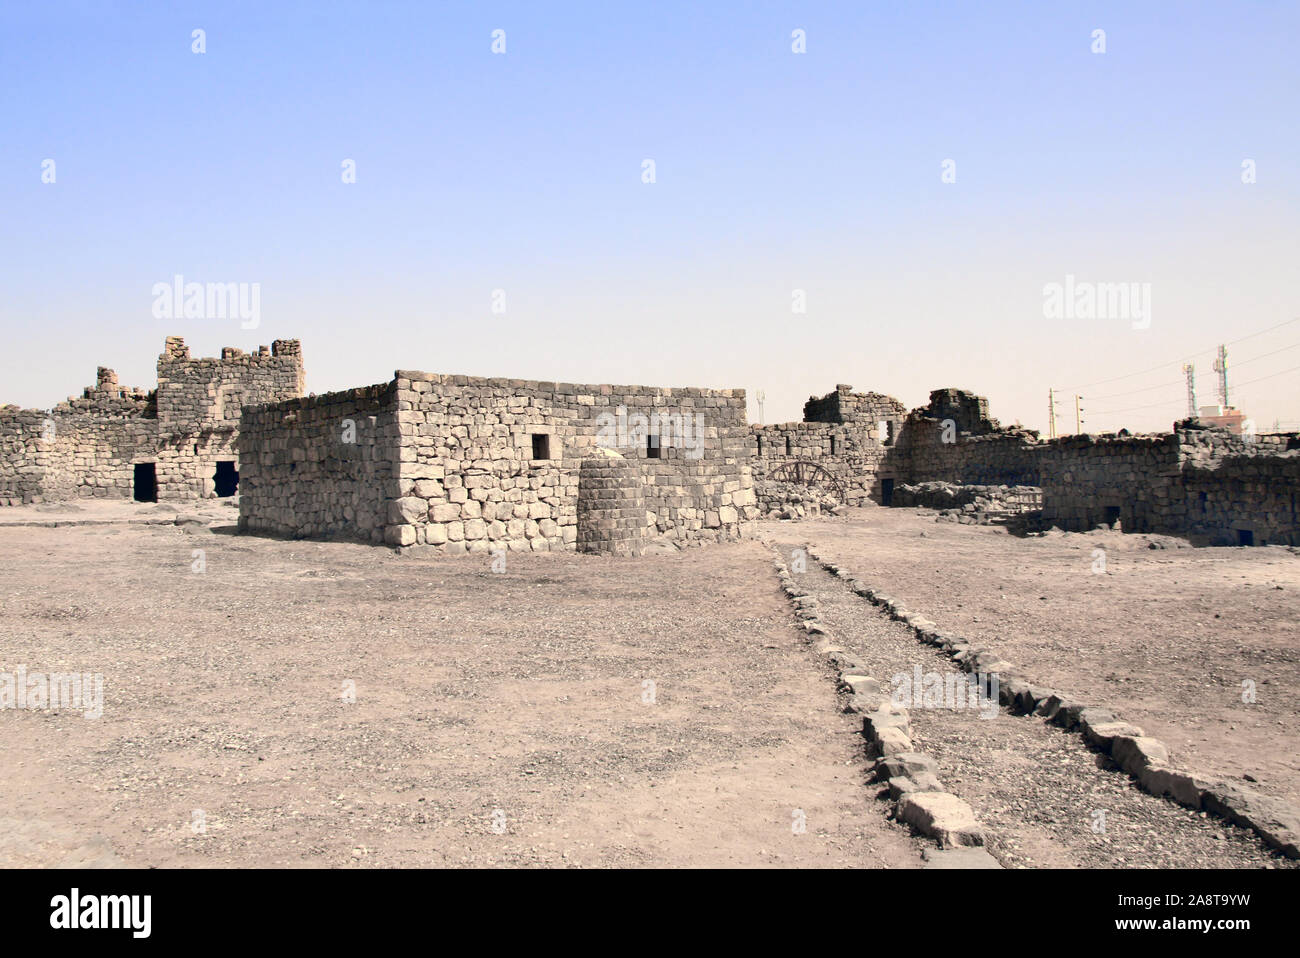 Courtyard of Qasr al-Azraq (is one of the Desert castles) - medieval fort where Thomas Edward Lawrence (Lawrence of Arabia) based his operations durin Stock Photo